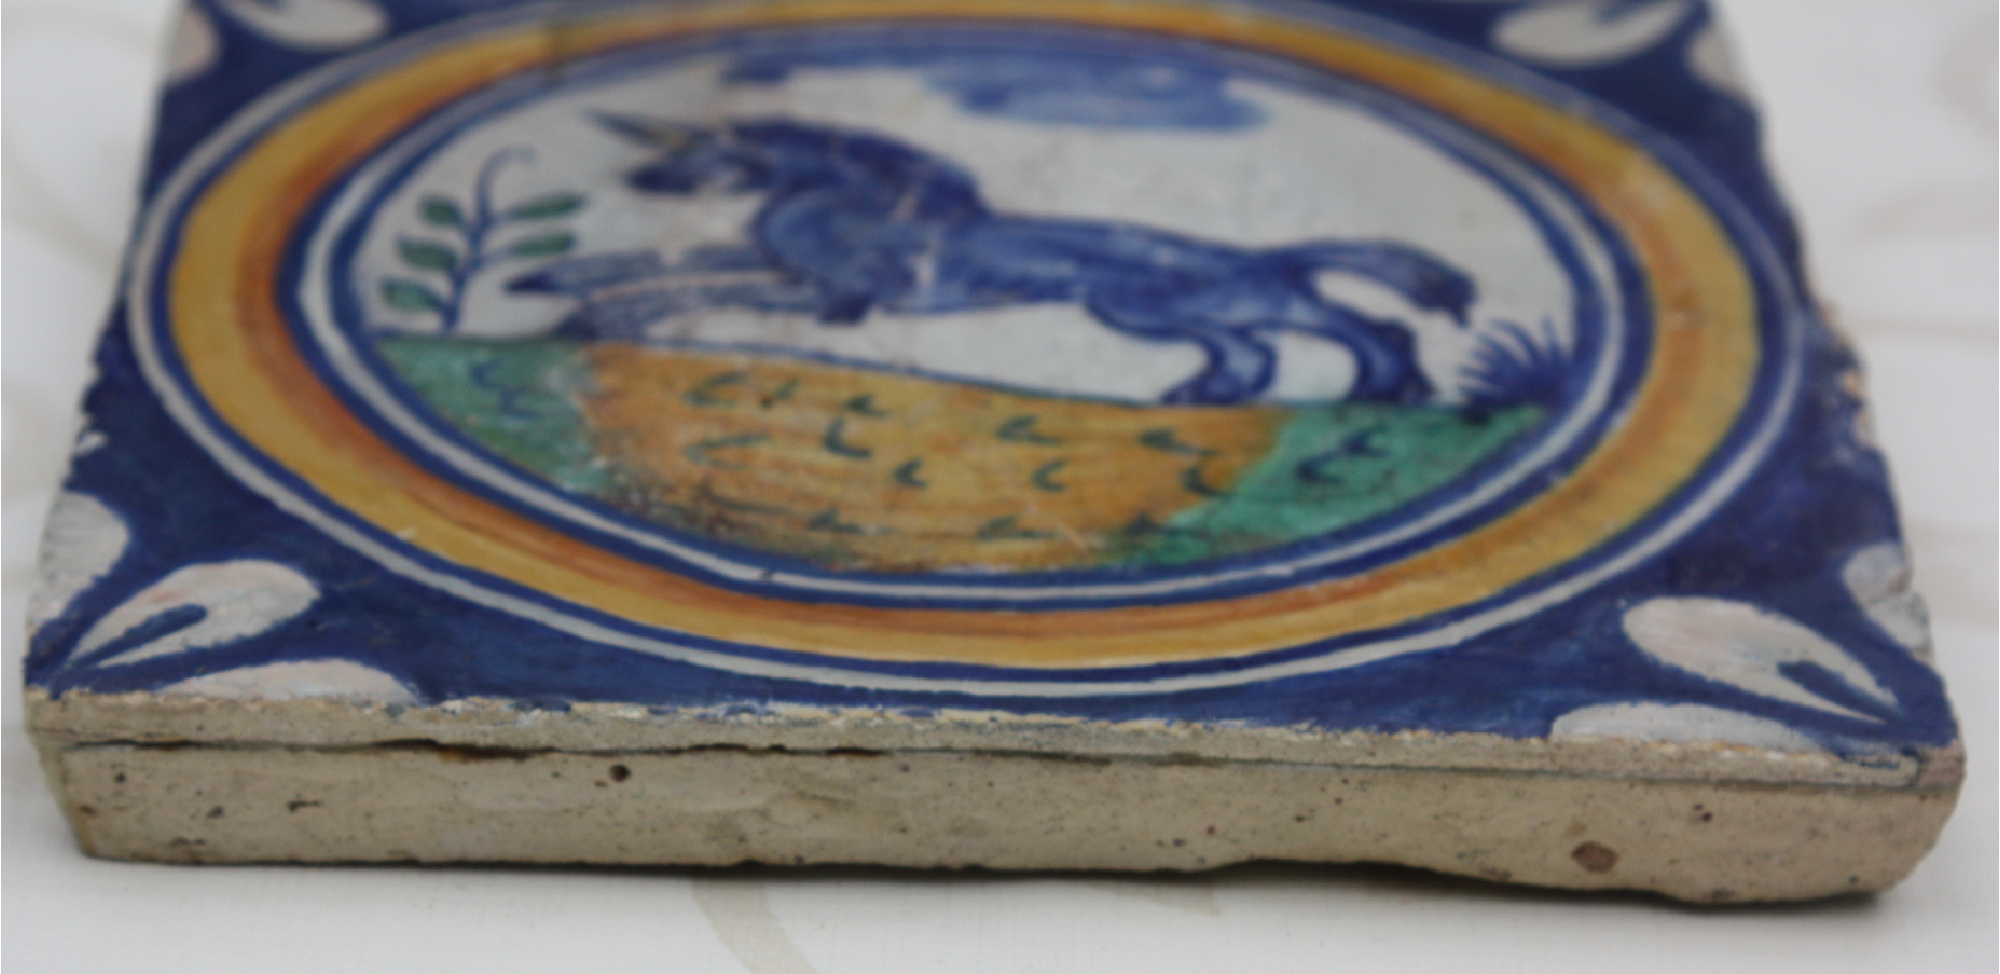 A rare 1600 hand-painted polychrome Delft stonework medallion tile, showing a running unicorn